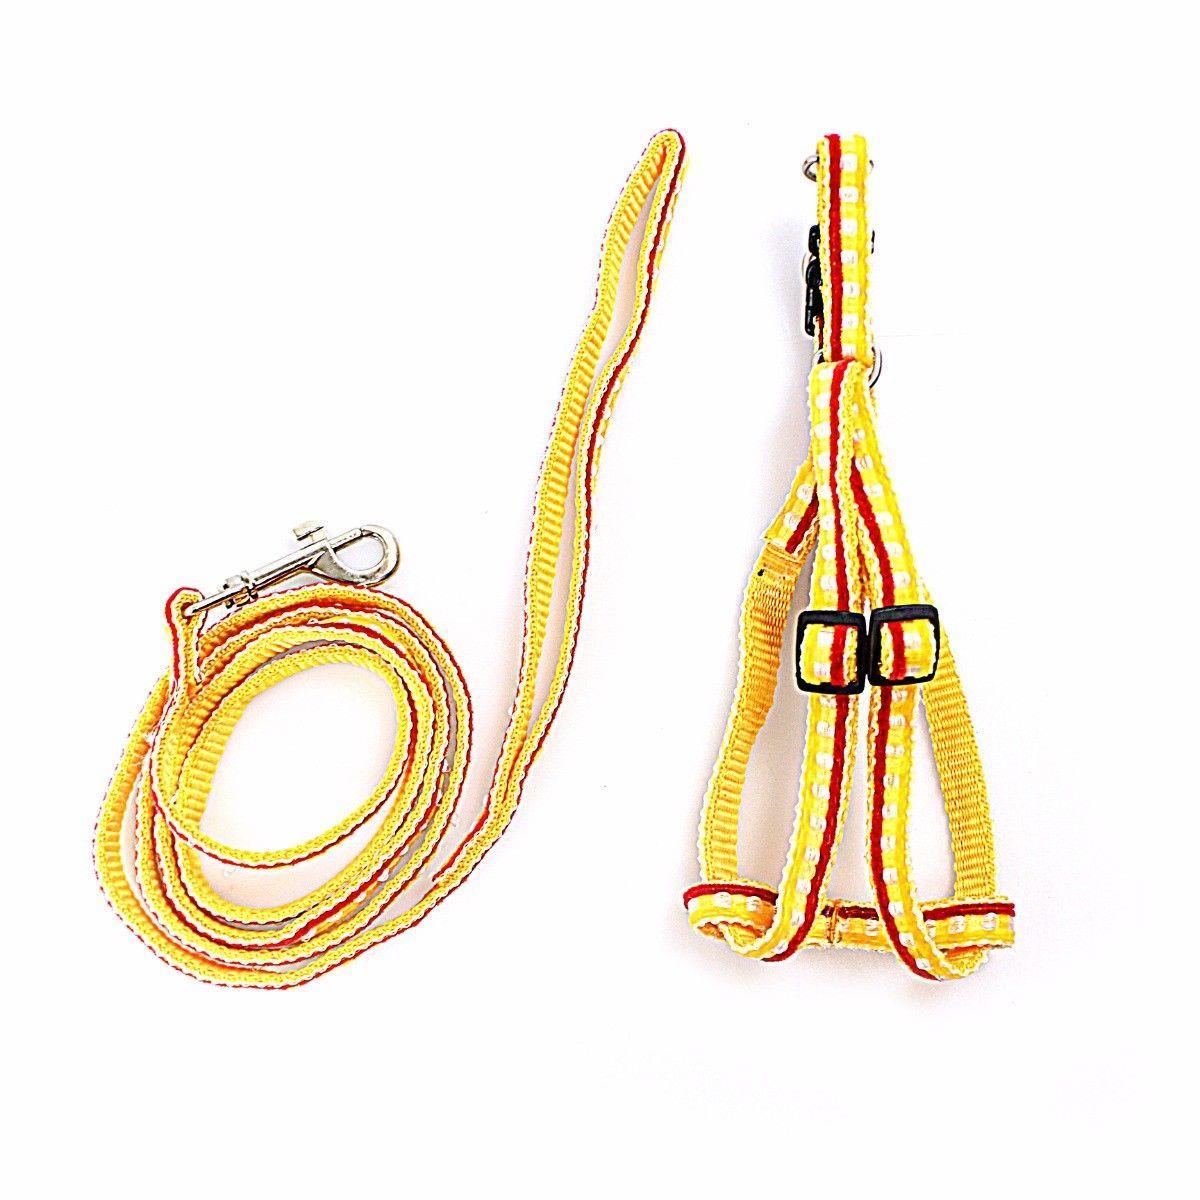 Dog Leash Lead with Harness Printed Designs Assorted Colours and Designs 0041 (Large Letter Rate)